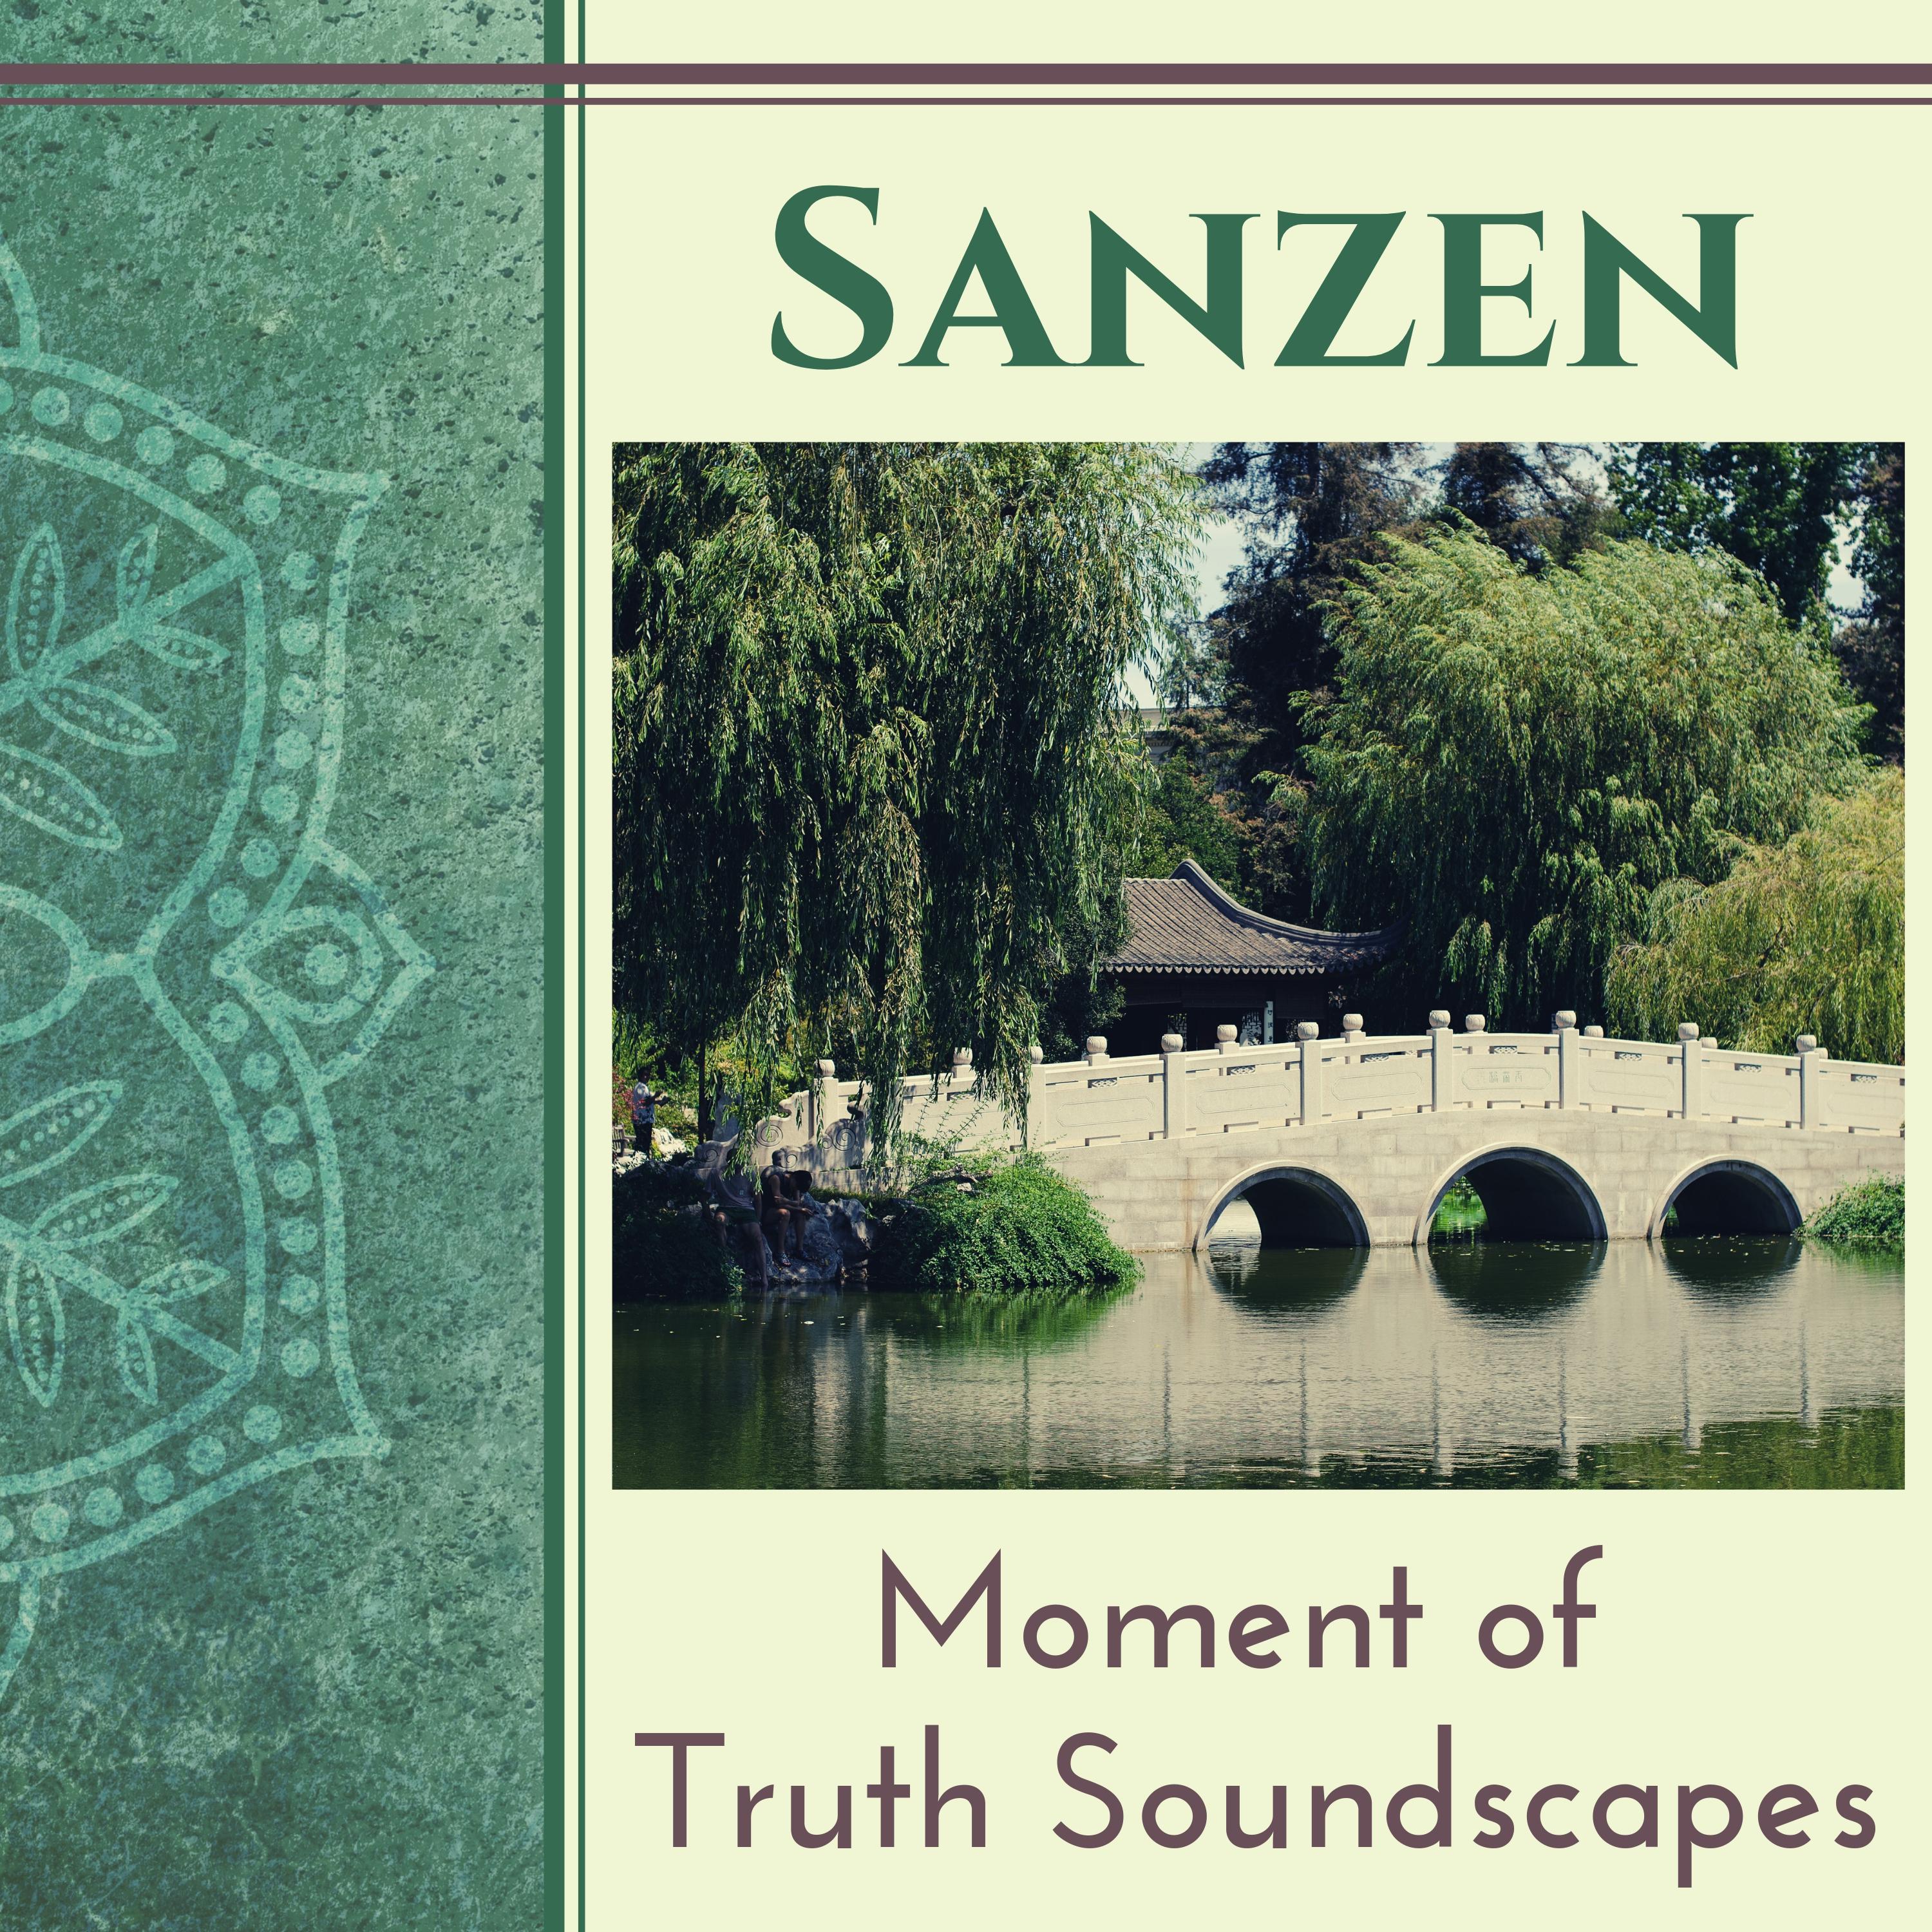 Moment of Truth Soundscapes